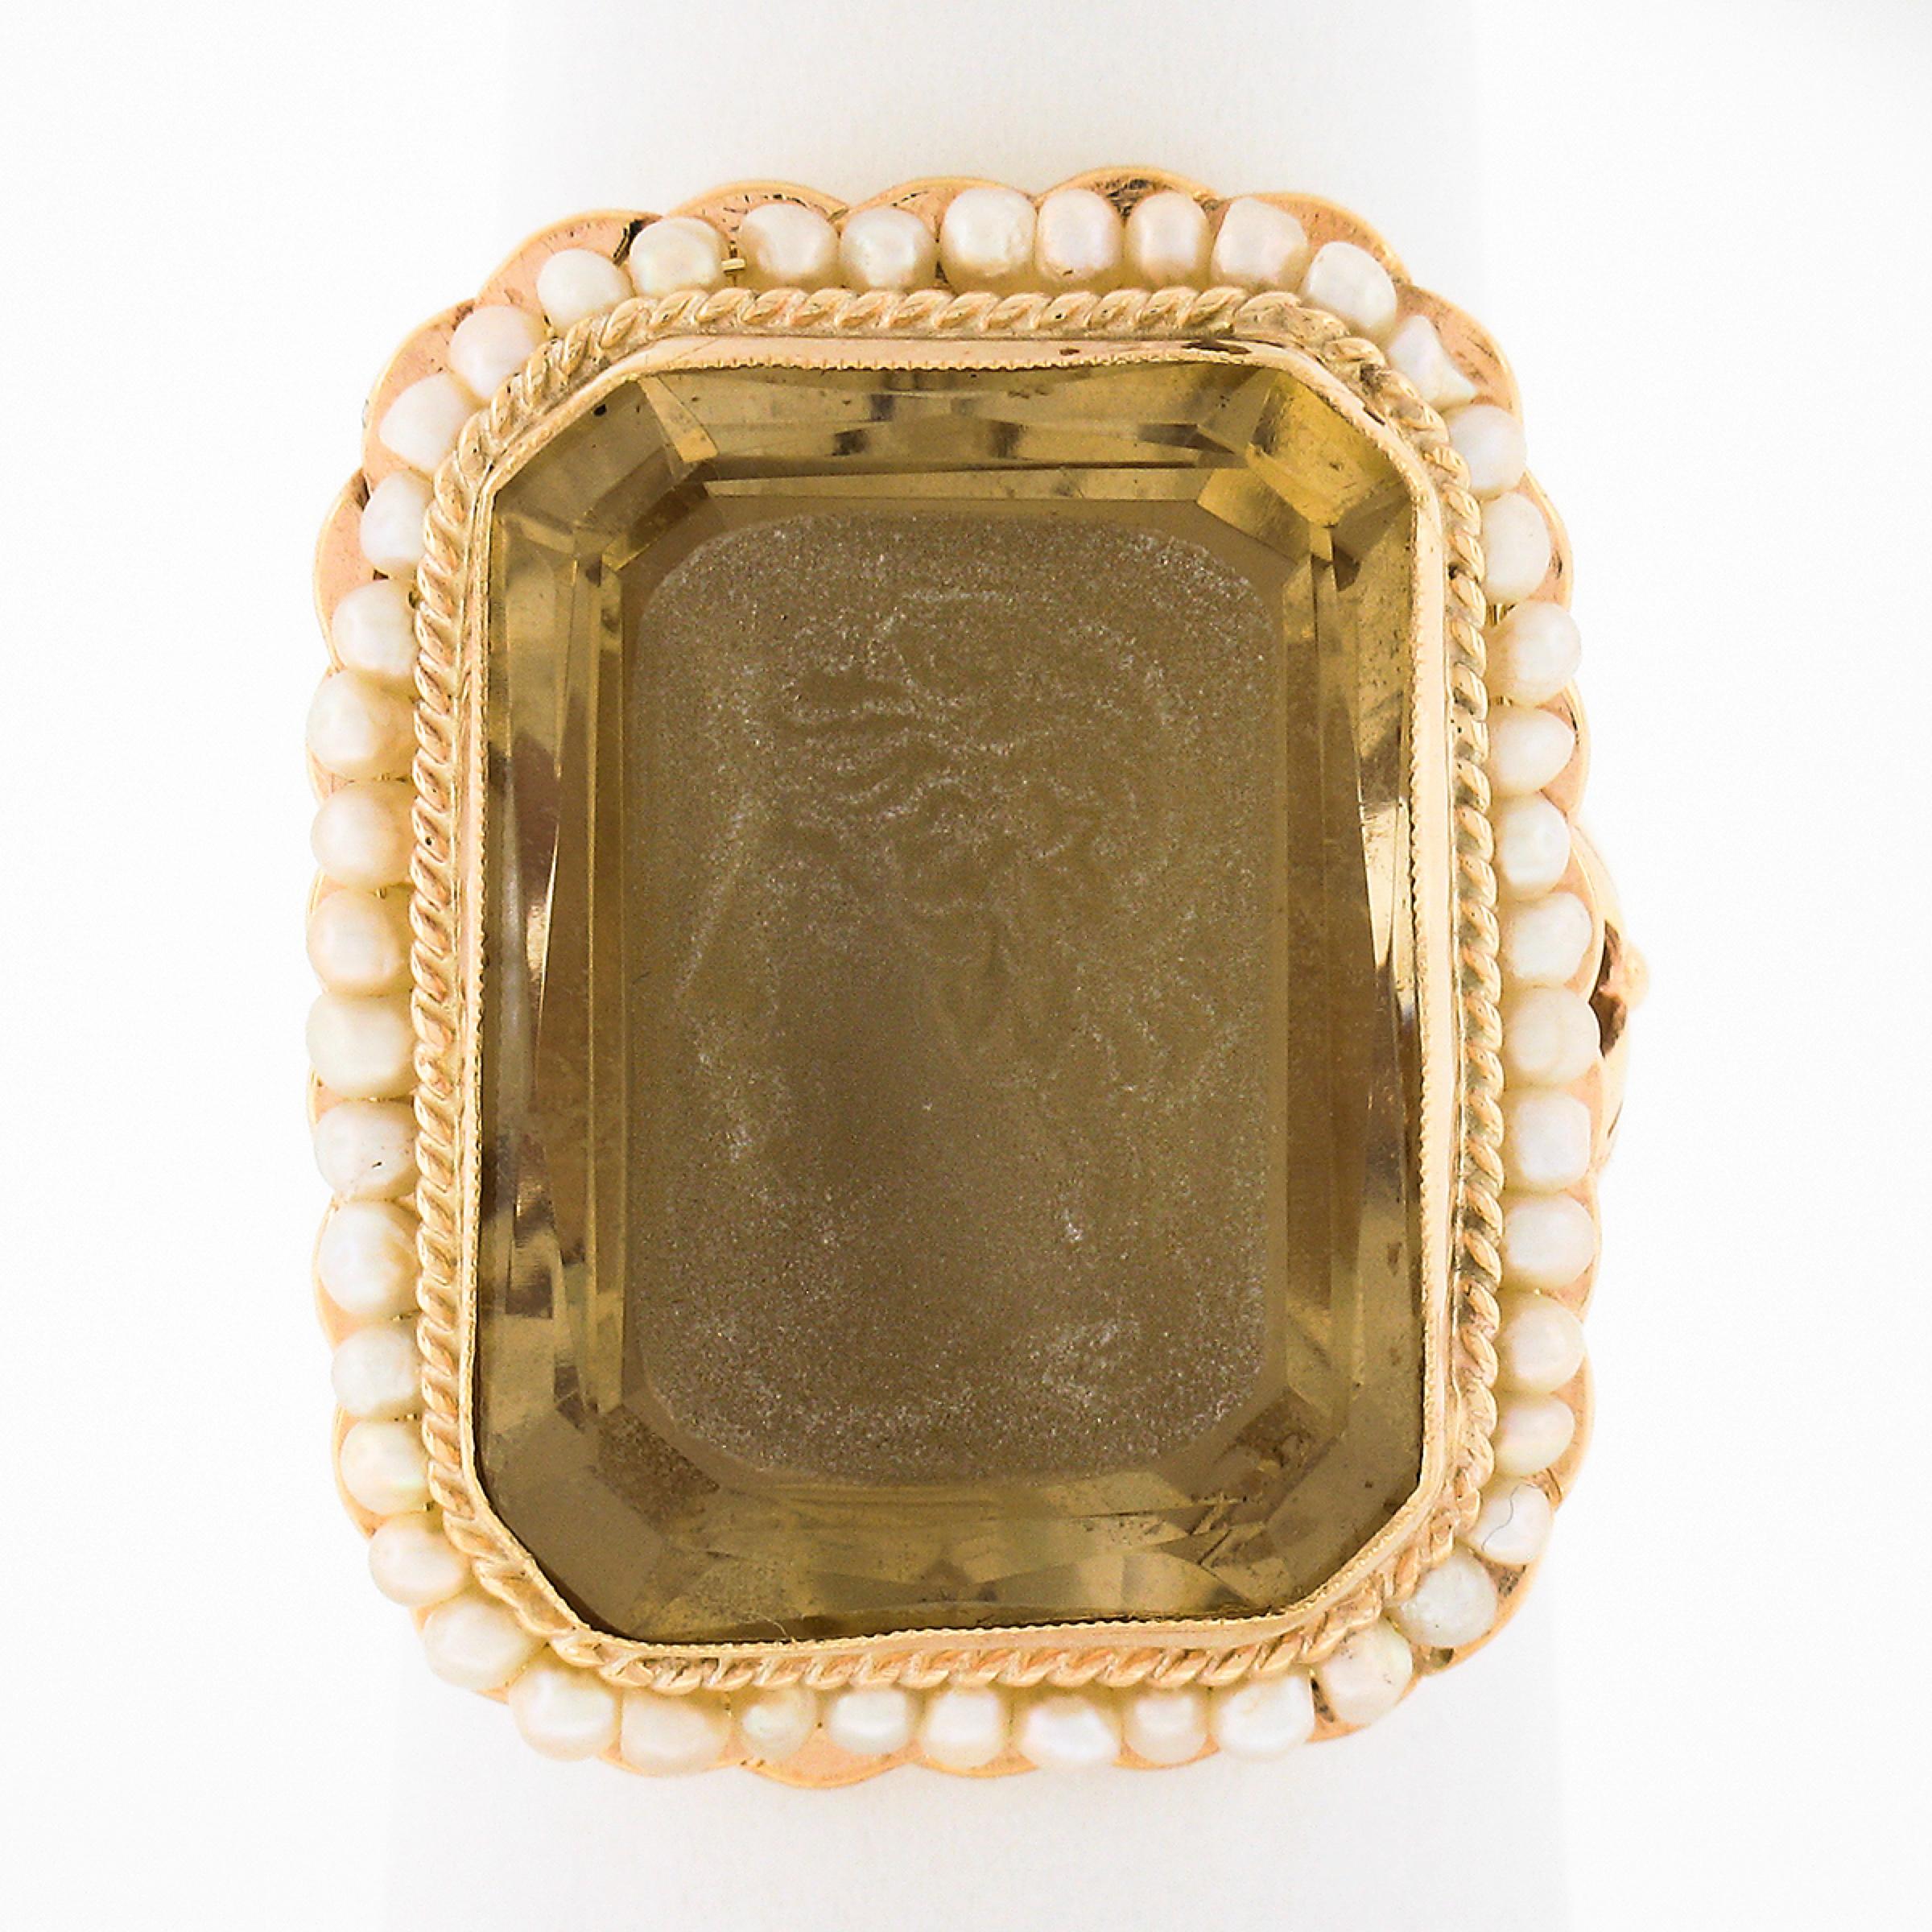 This magnificent vintage ring is crafted in solid 14k yellow gold and features a large rectangular shaped citrine solitaire stone which is neatly milgrain bezel set at the center of a twisted wire gold frame. The fine stone displays a warm light